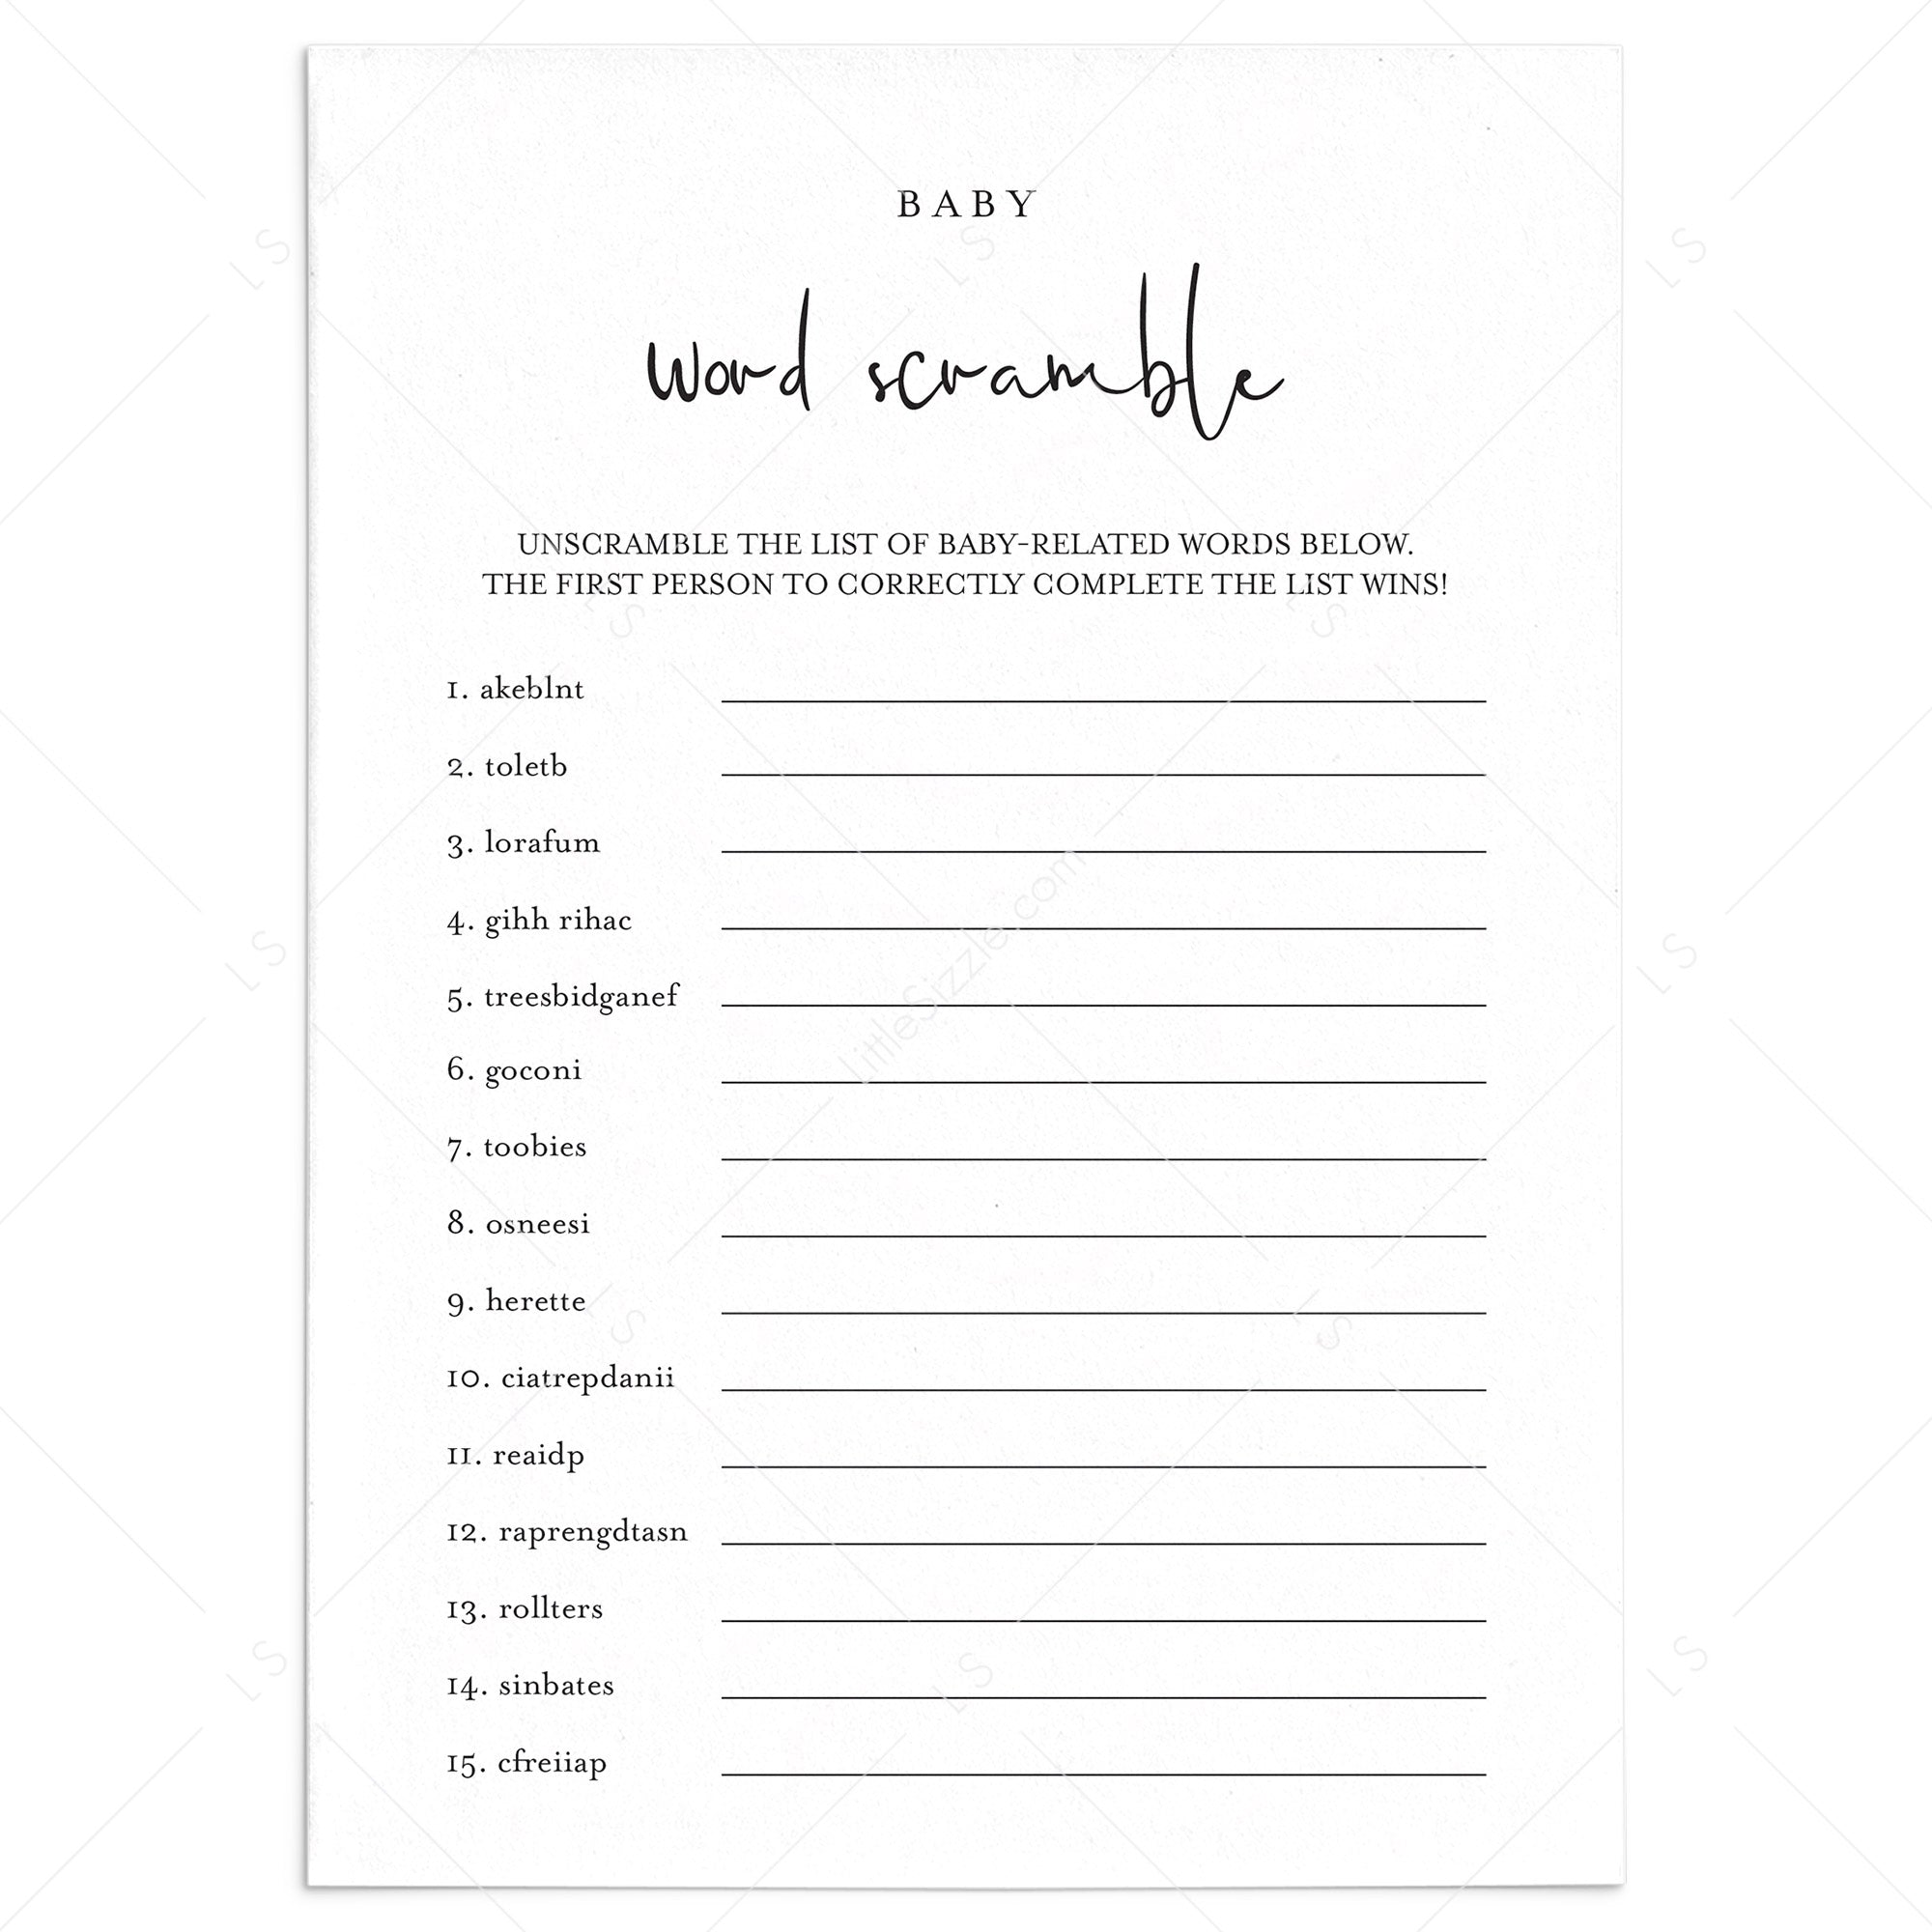 Word Scramble BabyShower Game Printable by LittleSizzle